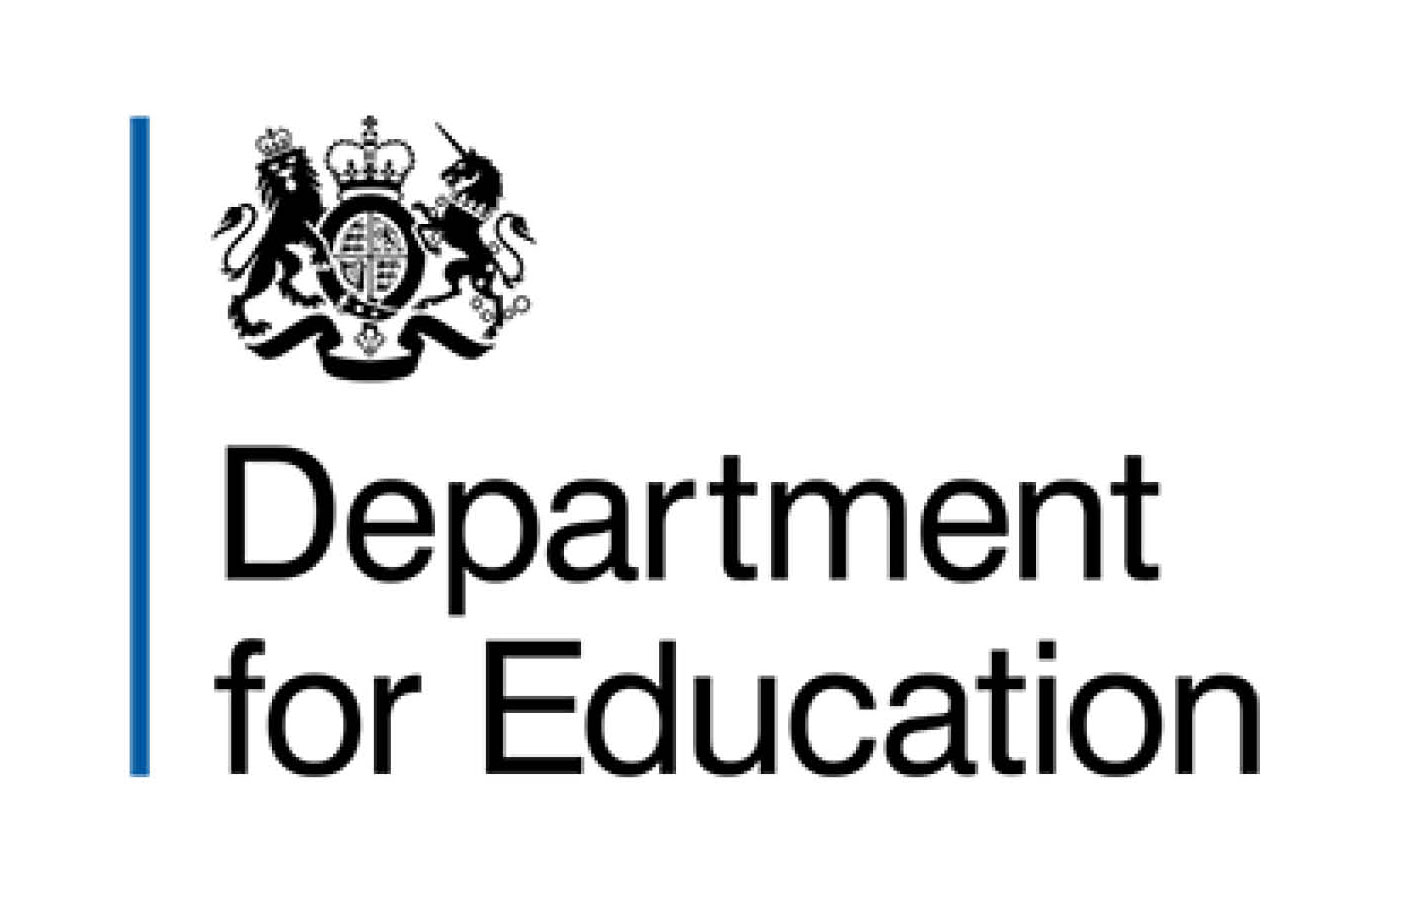 This image shows the logo in black lettering and a blue strip to the left for the Department of Education.